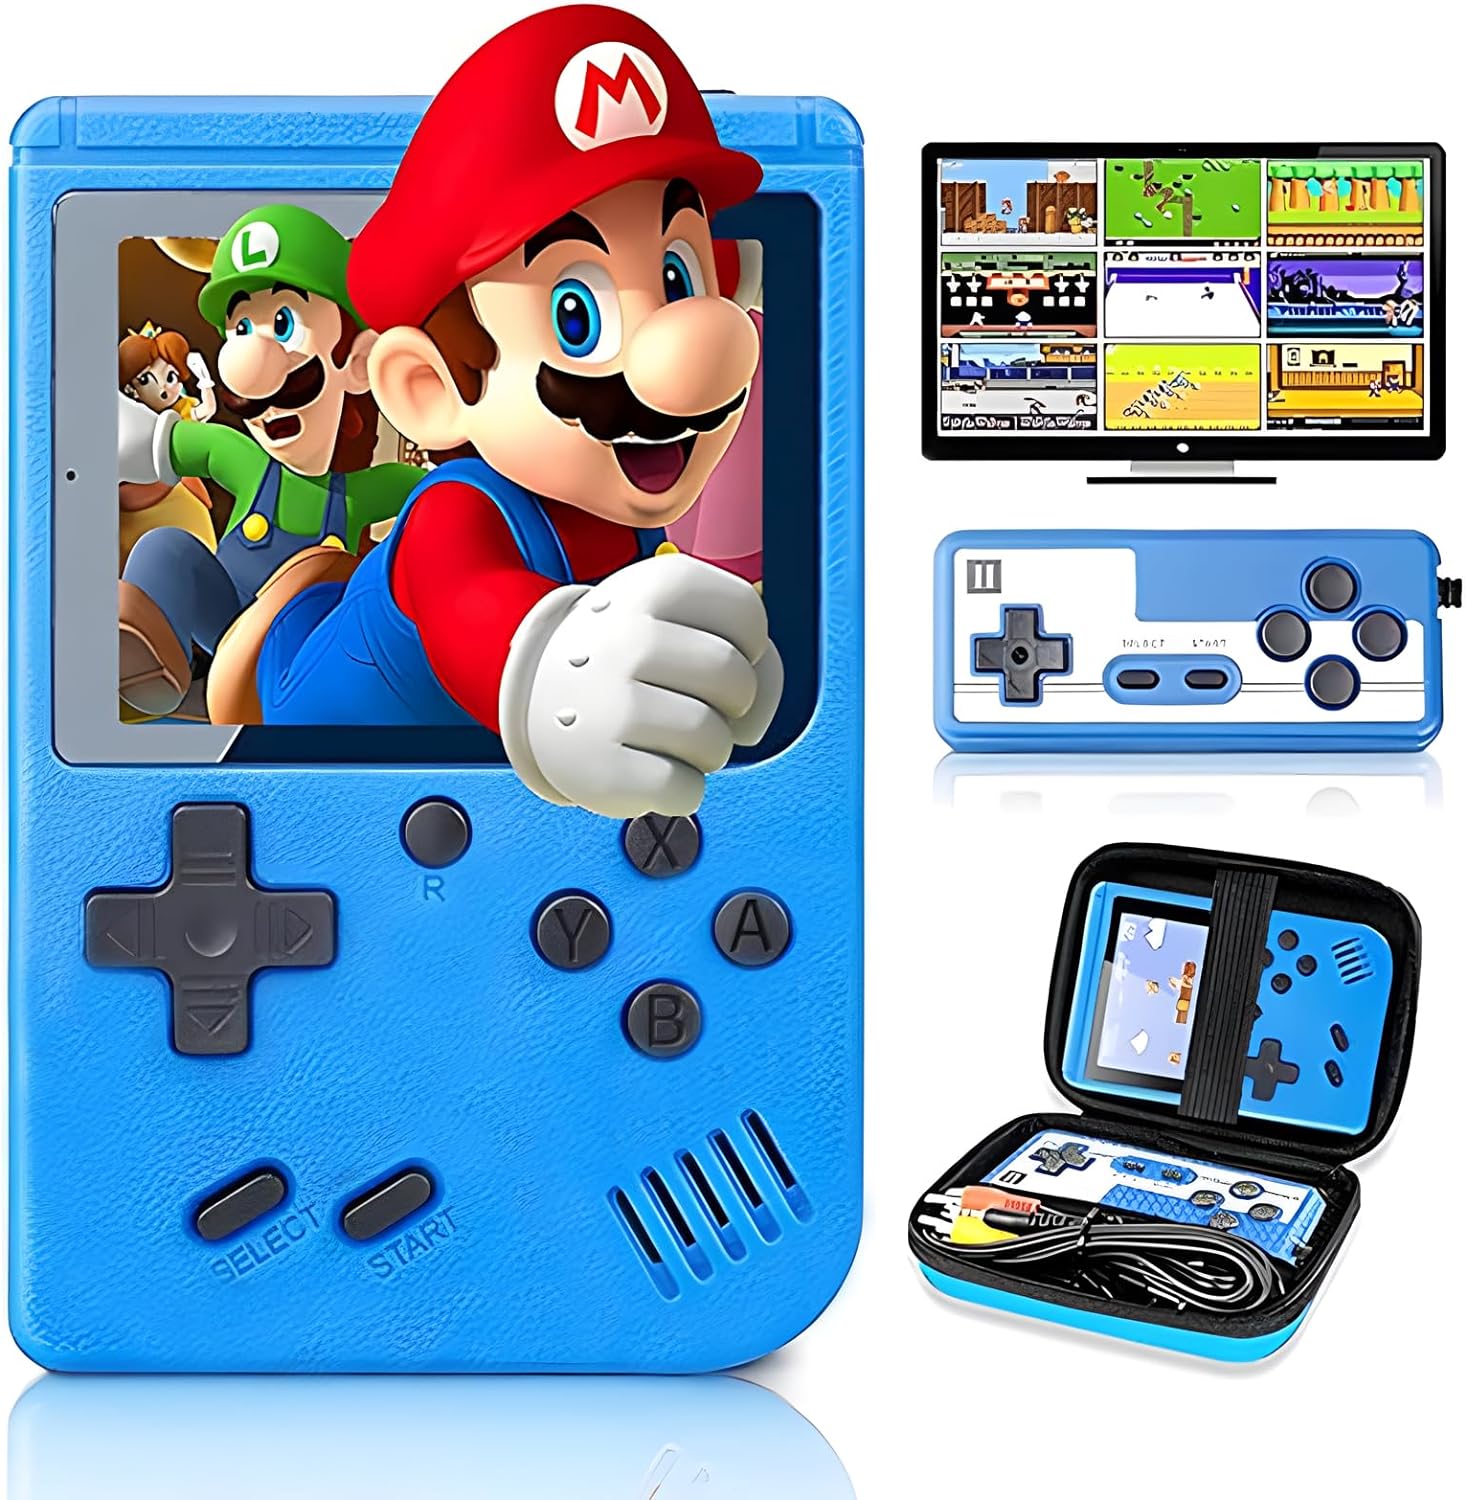 Tlsdosp Retro Handheld Game Console with 400 Classical FC Games-3.0 Inches Screen Portable Video Game Consoles with Protective Shell-Handheld Video Games Support for Connecting TV & Two Players (Blue)